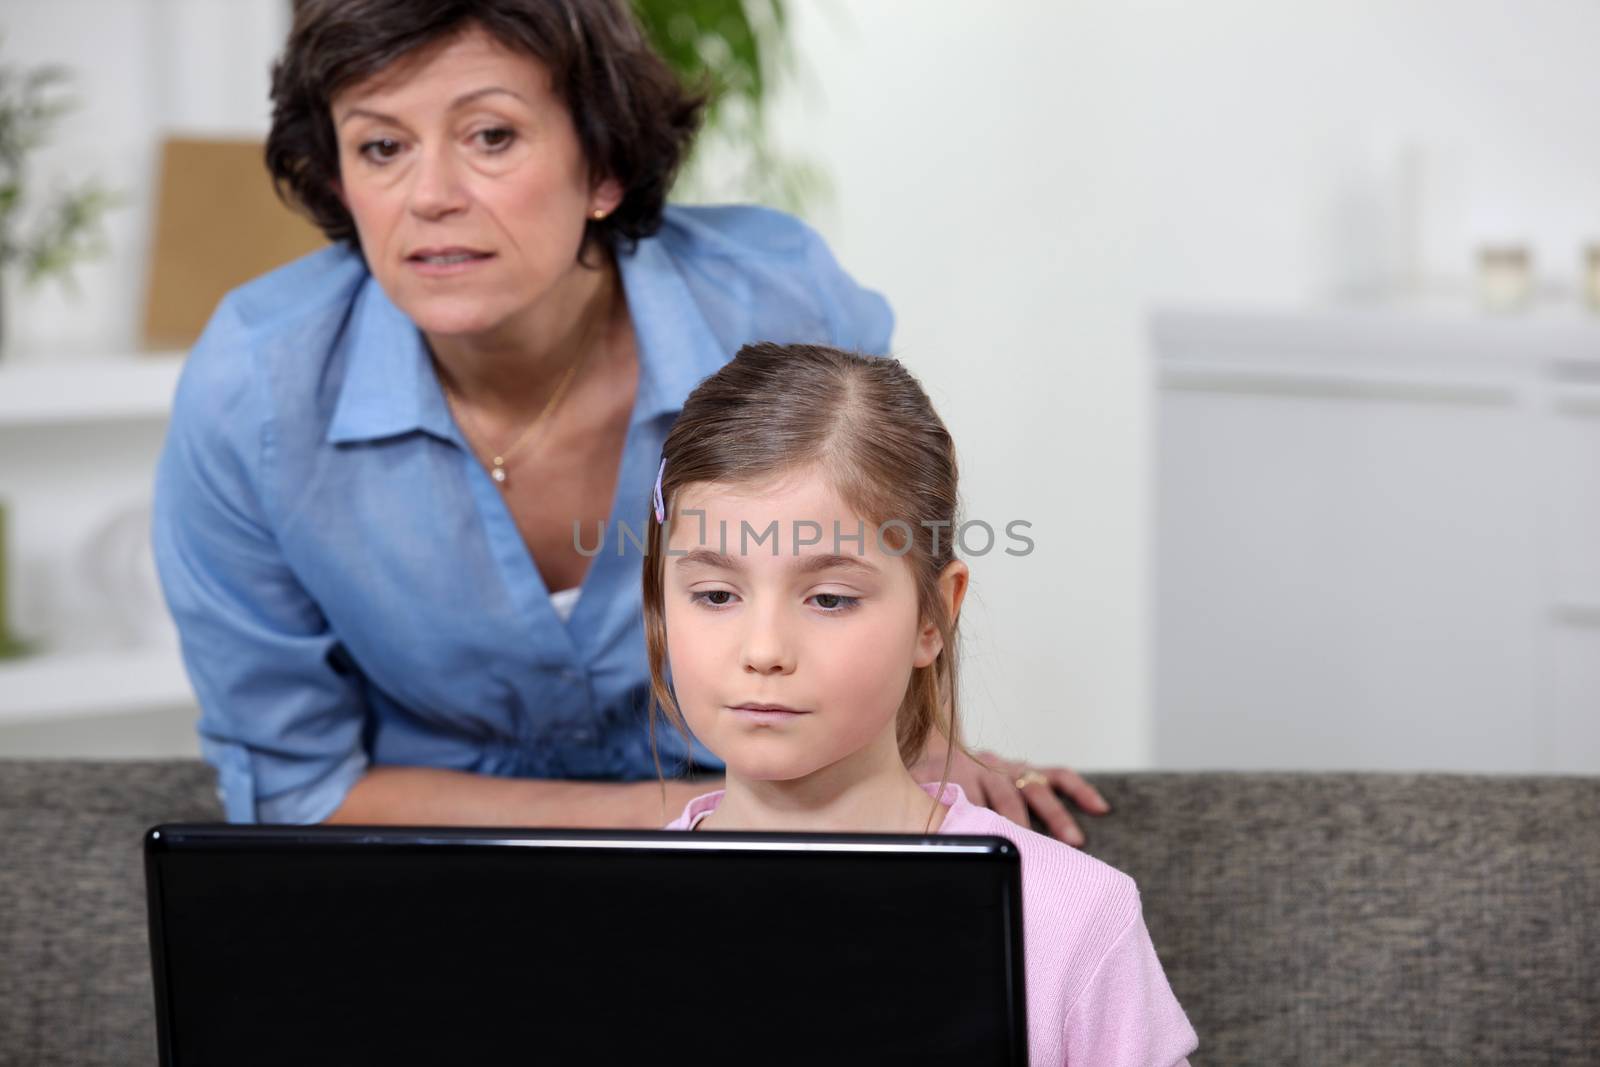 Woman and girl looking at a laptop computer